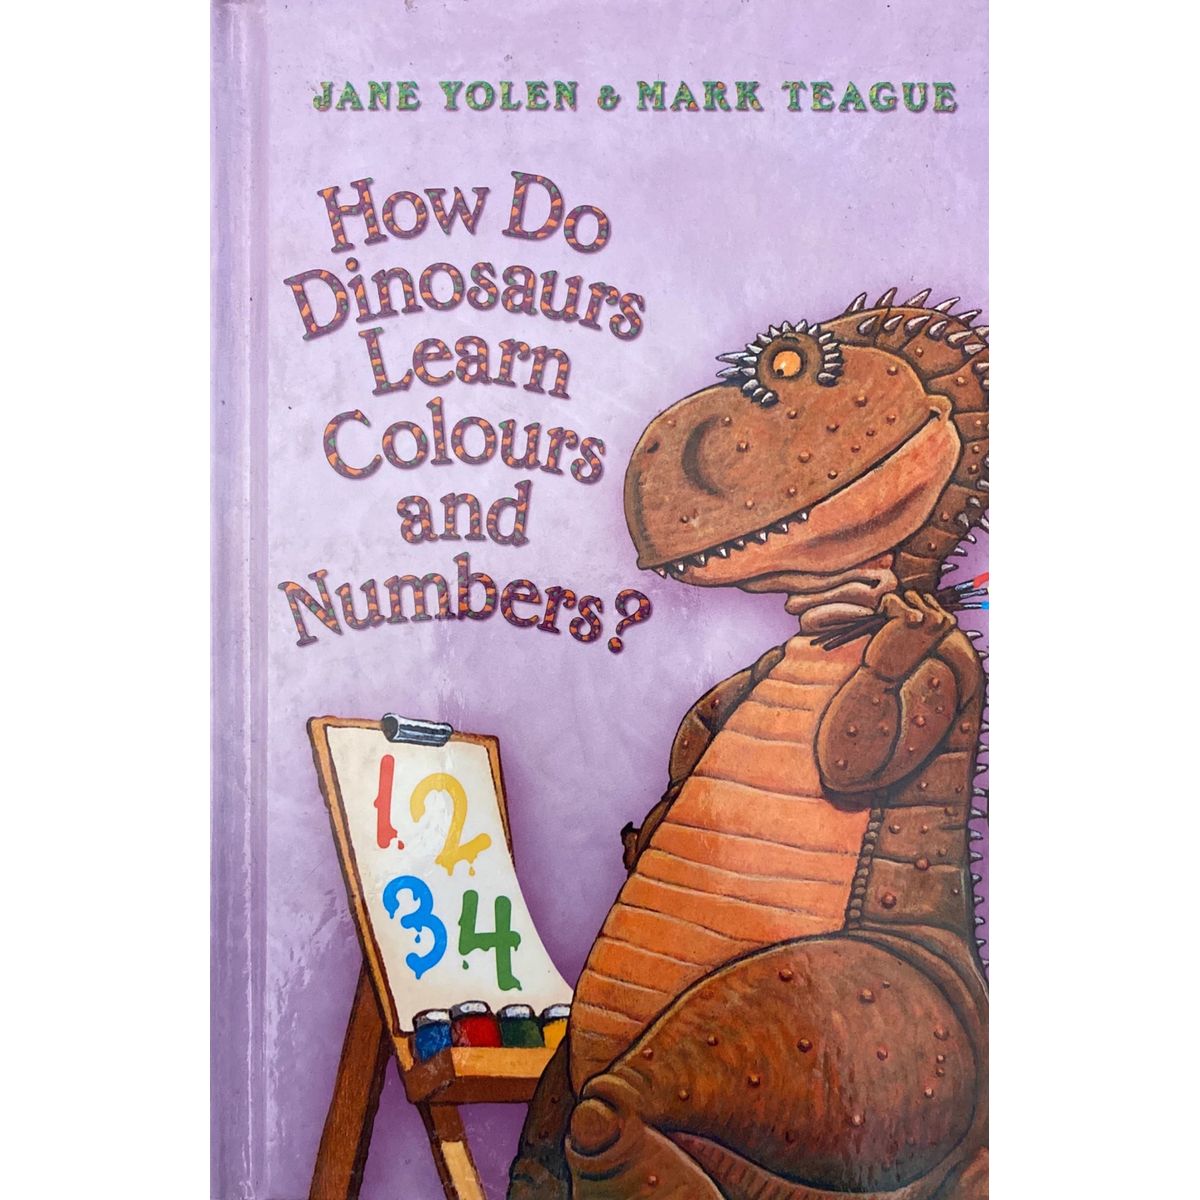 ISBN: 9780007865154 / 0007865155 - How Do Dinosaurs Learn Colours and Numbers? by Jane Yolen & Mark Teague [2011]